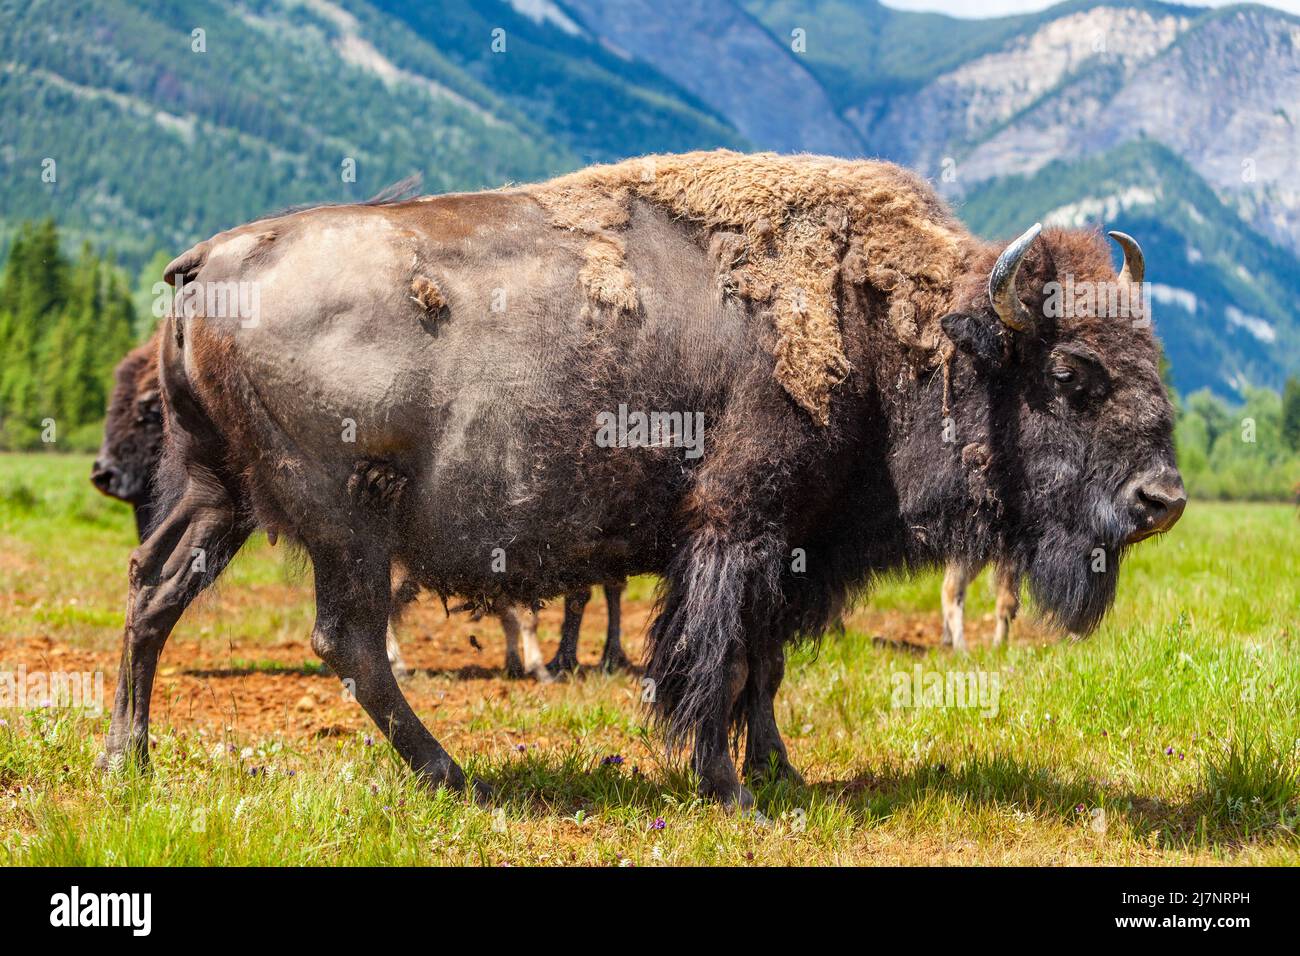 American Bison (Bison Bison) or Buffalo outside in a field surrounded by mountains Stock Photo